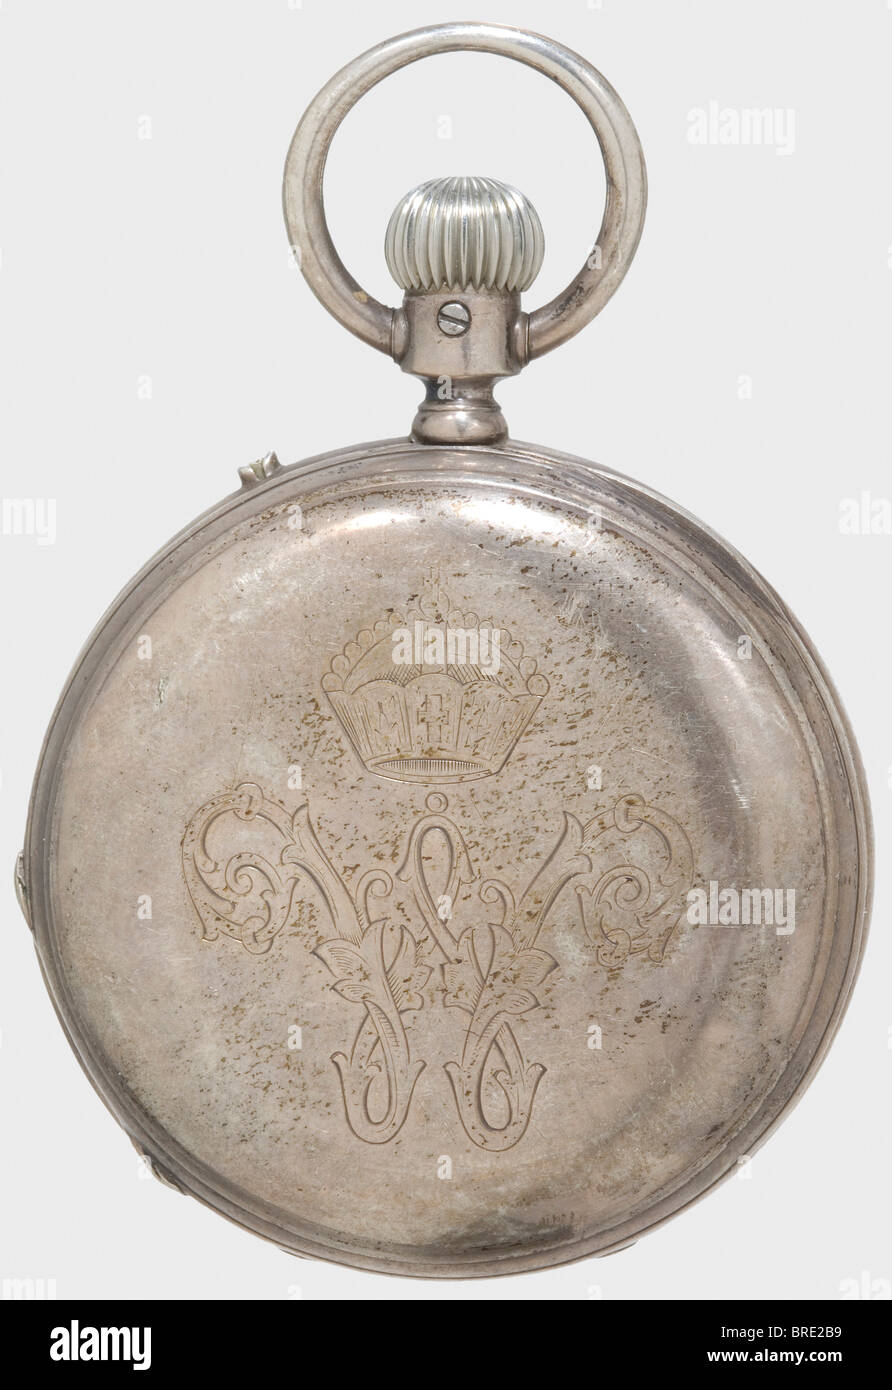 Kaiser Wilhelm I, an imperial prize in the form of a pocket watch silver-plated half-savonette. The front cover has an additional hours dial, the back bears the engraved cipher 'W' beneath an imperial crown and is engraved on the inside with 'Kaiserpreis Militär-Schießschule Spandau d. 11 Novbr. 1885. f. d. Sergent Lingner v. 7. Württembergischen Inf. Rgt. No 125.' (Imperial Prize, Military Marksmanship School Spandau 11 Nov. 1885. for Sergeant Lingner of the 7th Württemberg Inf. Rgt. No. 125), 'Gebr. Eppner Berlin' (Eppner Bros. Berlin), and '68502'. White ena, Stock Photo